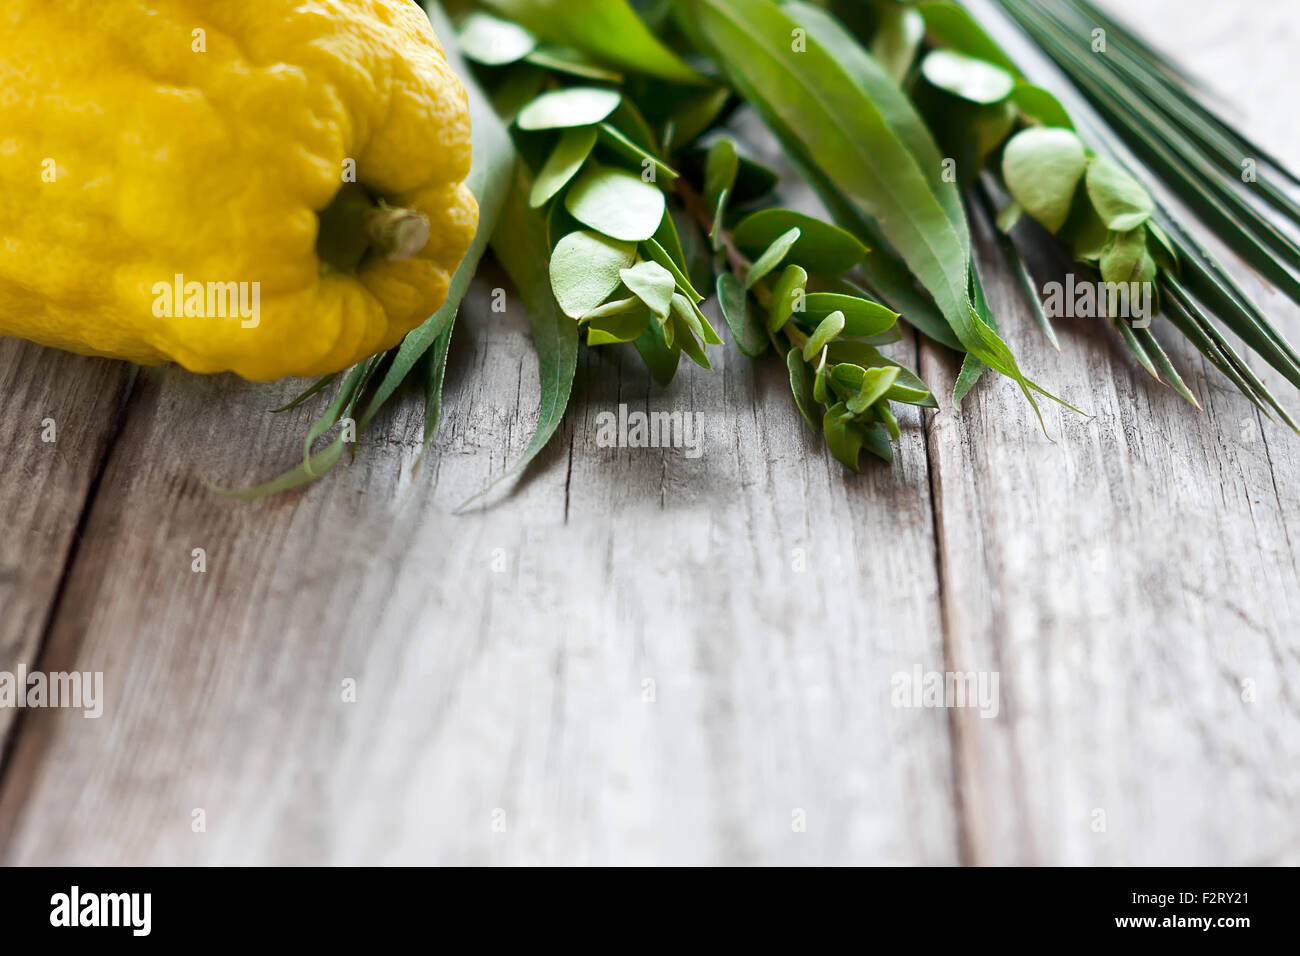 Symbols of jewish fall festival of Sukkot, lulav - etrog, palm branch, myrtle and willow - on old wooden background. Stock Photo